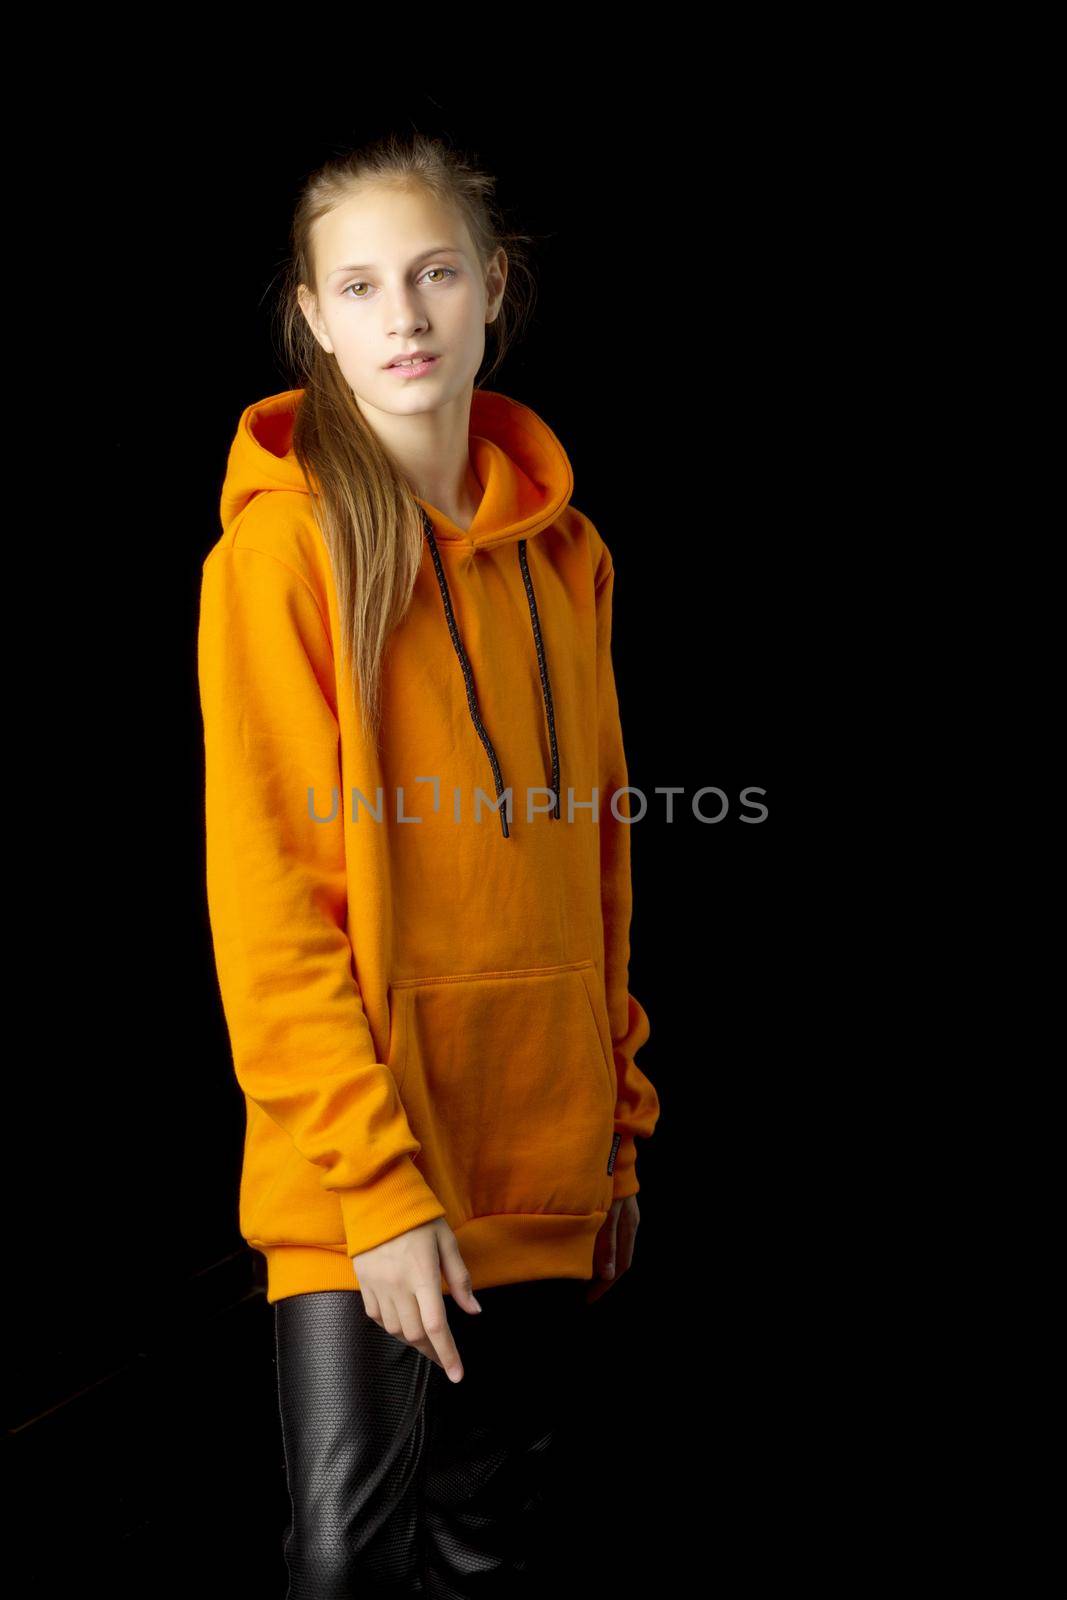 Attractive teenage girl in fashionable outfit. Three quarter length studio shot of girl with ponytail wearing oversized orange hoodie and black leather pants posing against black background